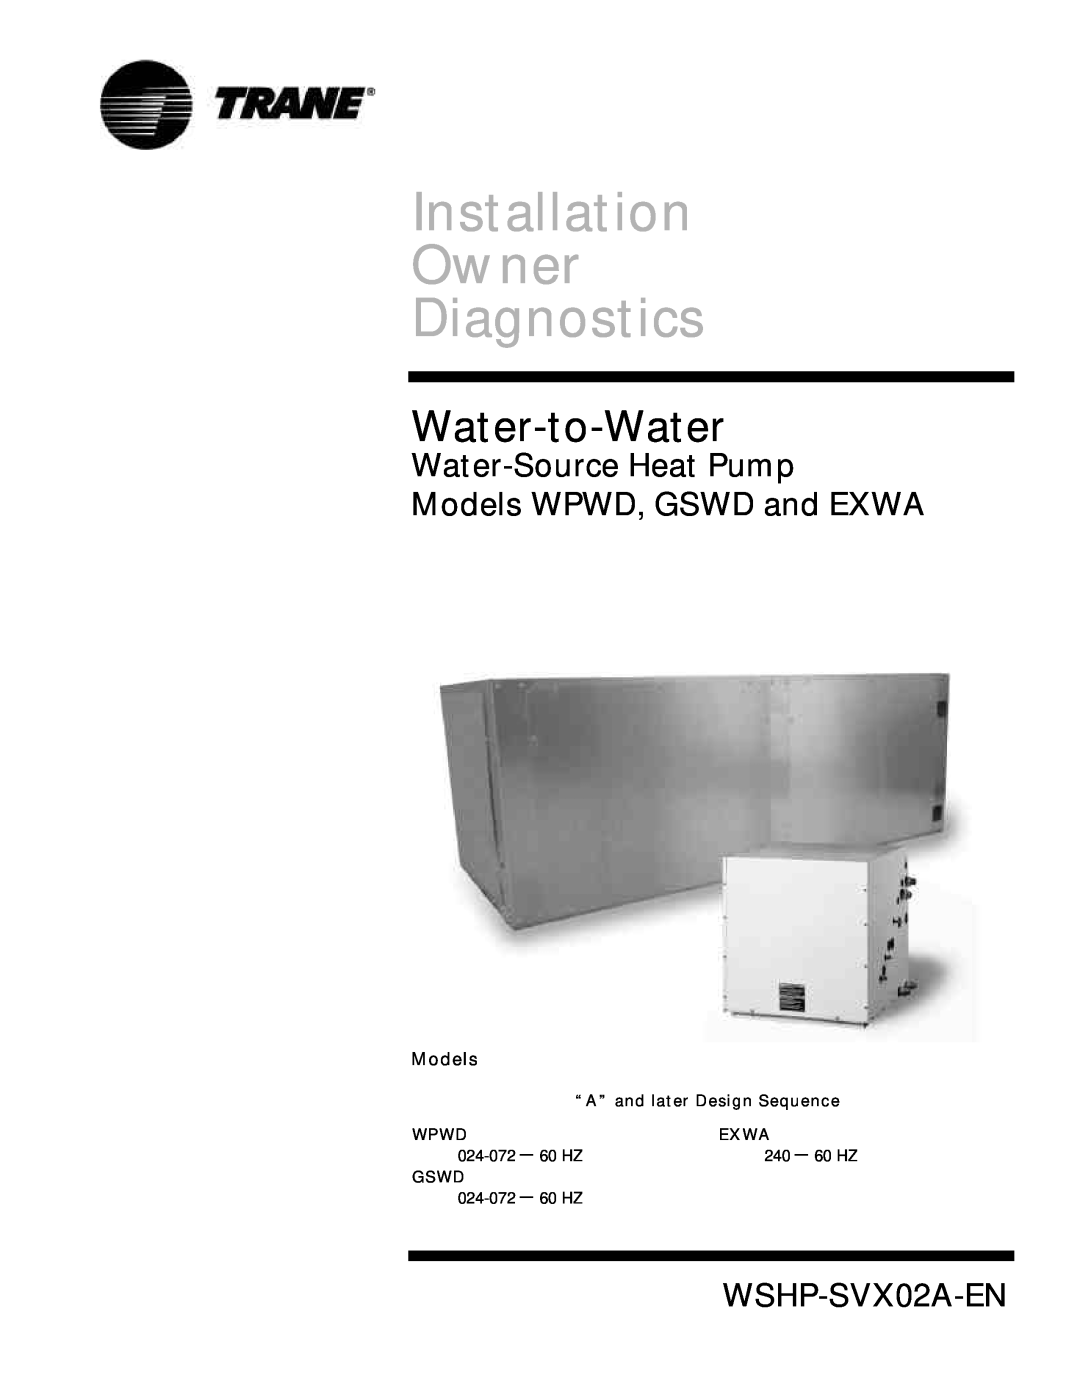 Trane manual Installation Owner Diagnostics, Water-to-Water, Water-SourceHeat Pump Models WPWD, GSWD and EXWA 